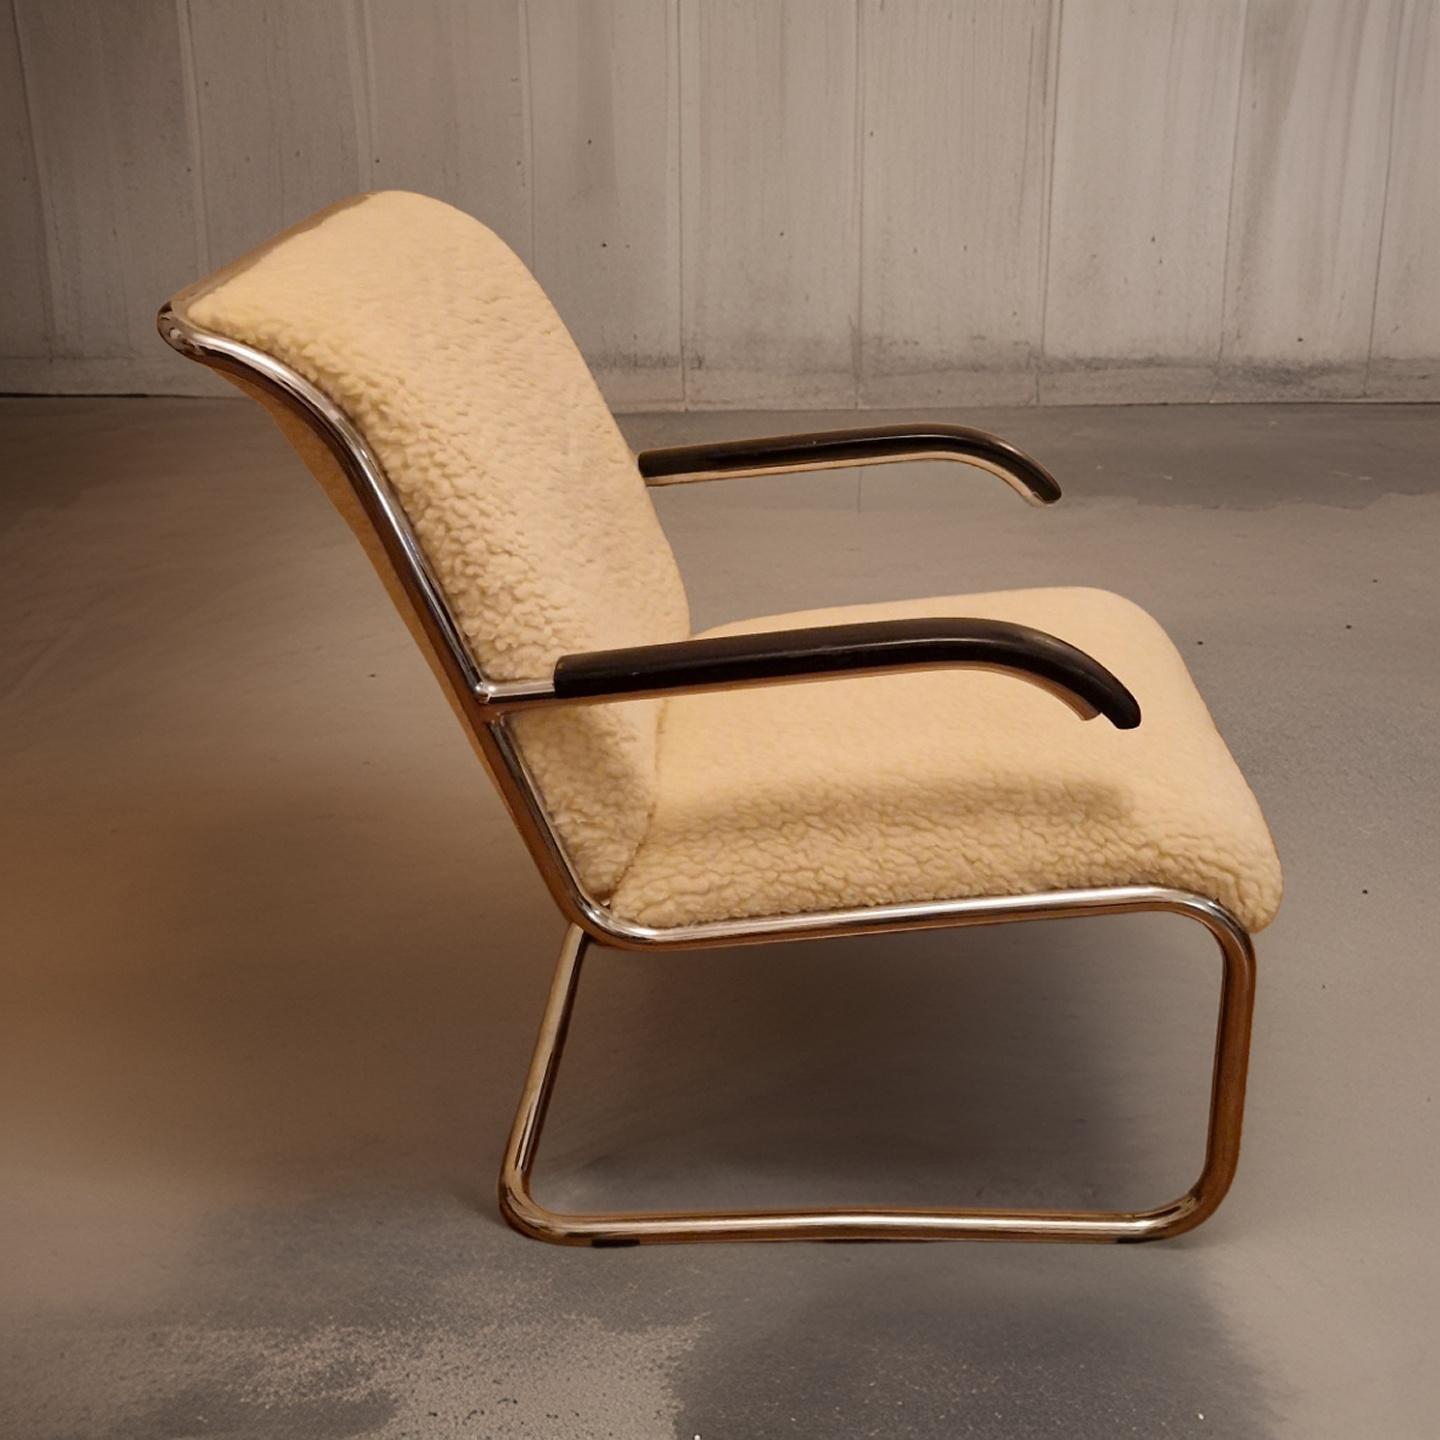 Bauhaus tubelar frame lounge chair. Reupholstered in thick and tactile Merino wool fabric. The chair has the original steel springs in the seat and back. The original jute inside has also been preserved. 
The frame is made out of metal tubes. It is